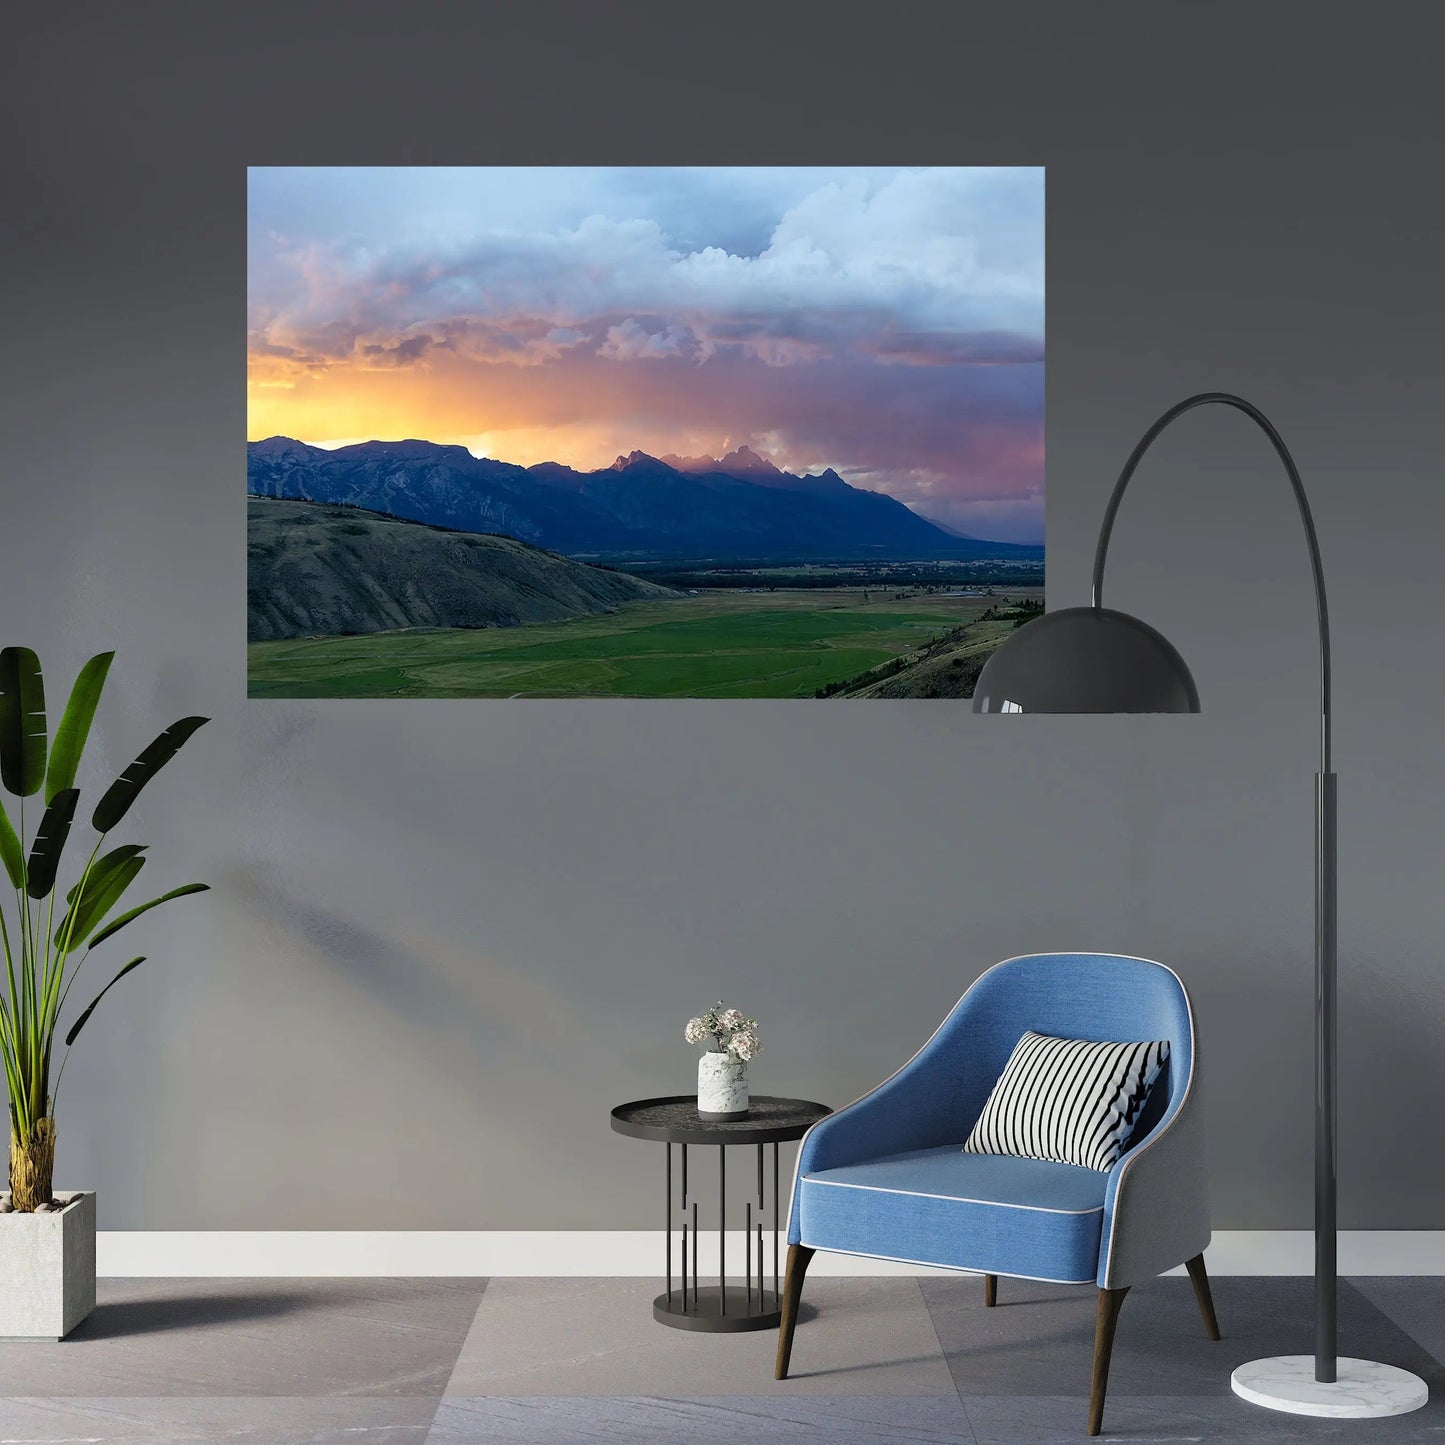 teton mountain sunset on gray wall by chair 30x20 American West sunset sky home decor